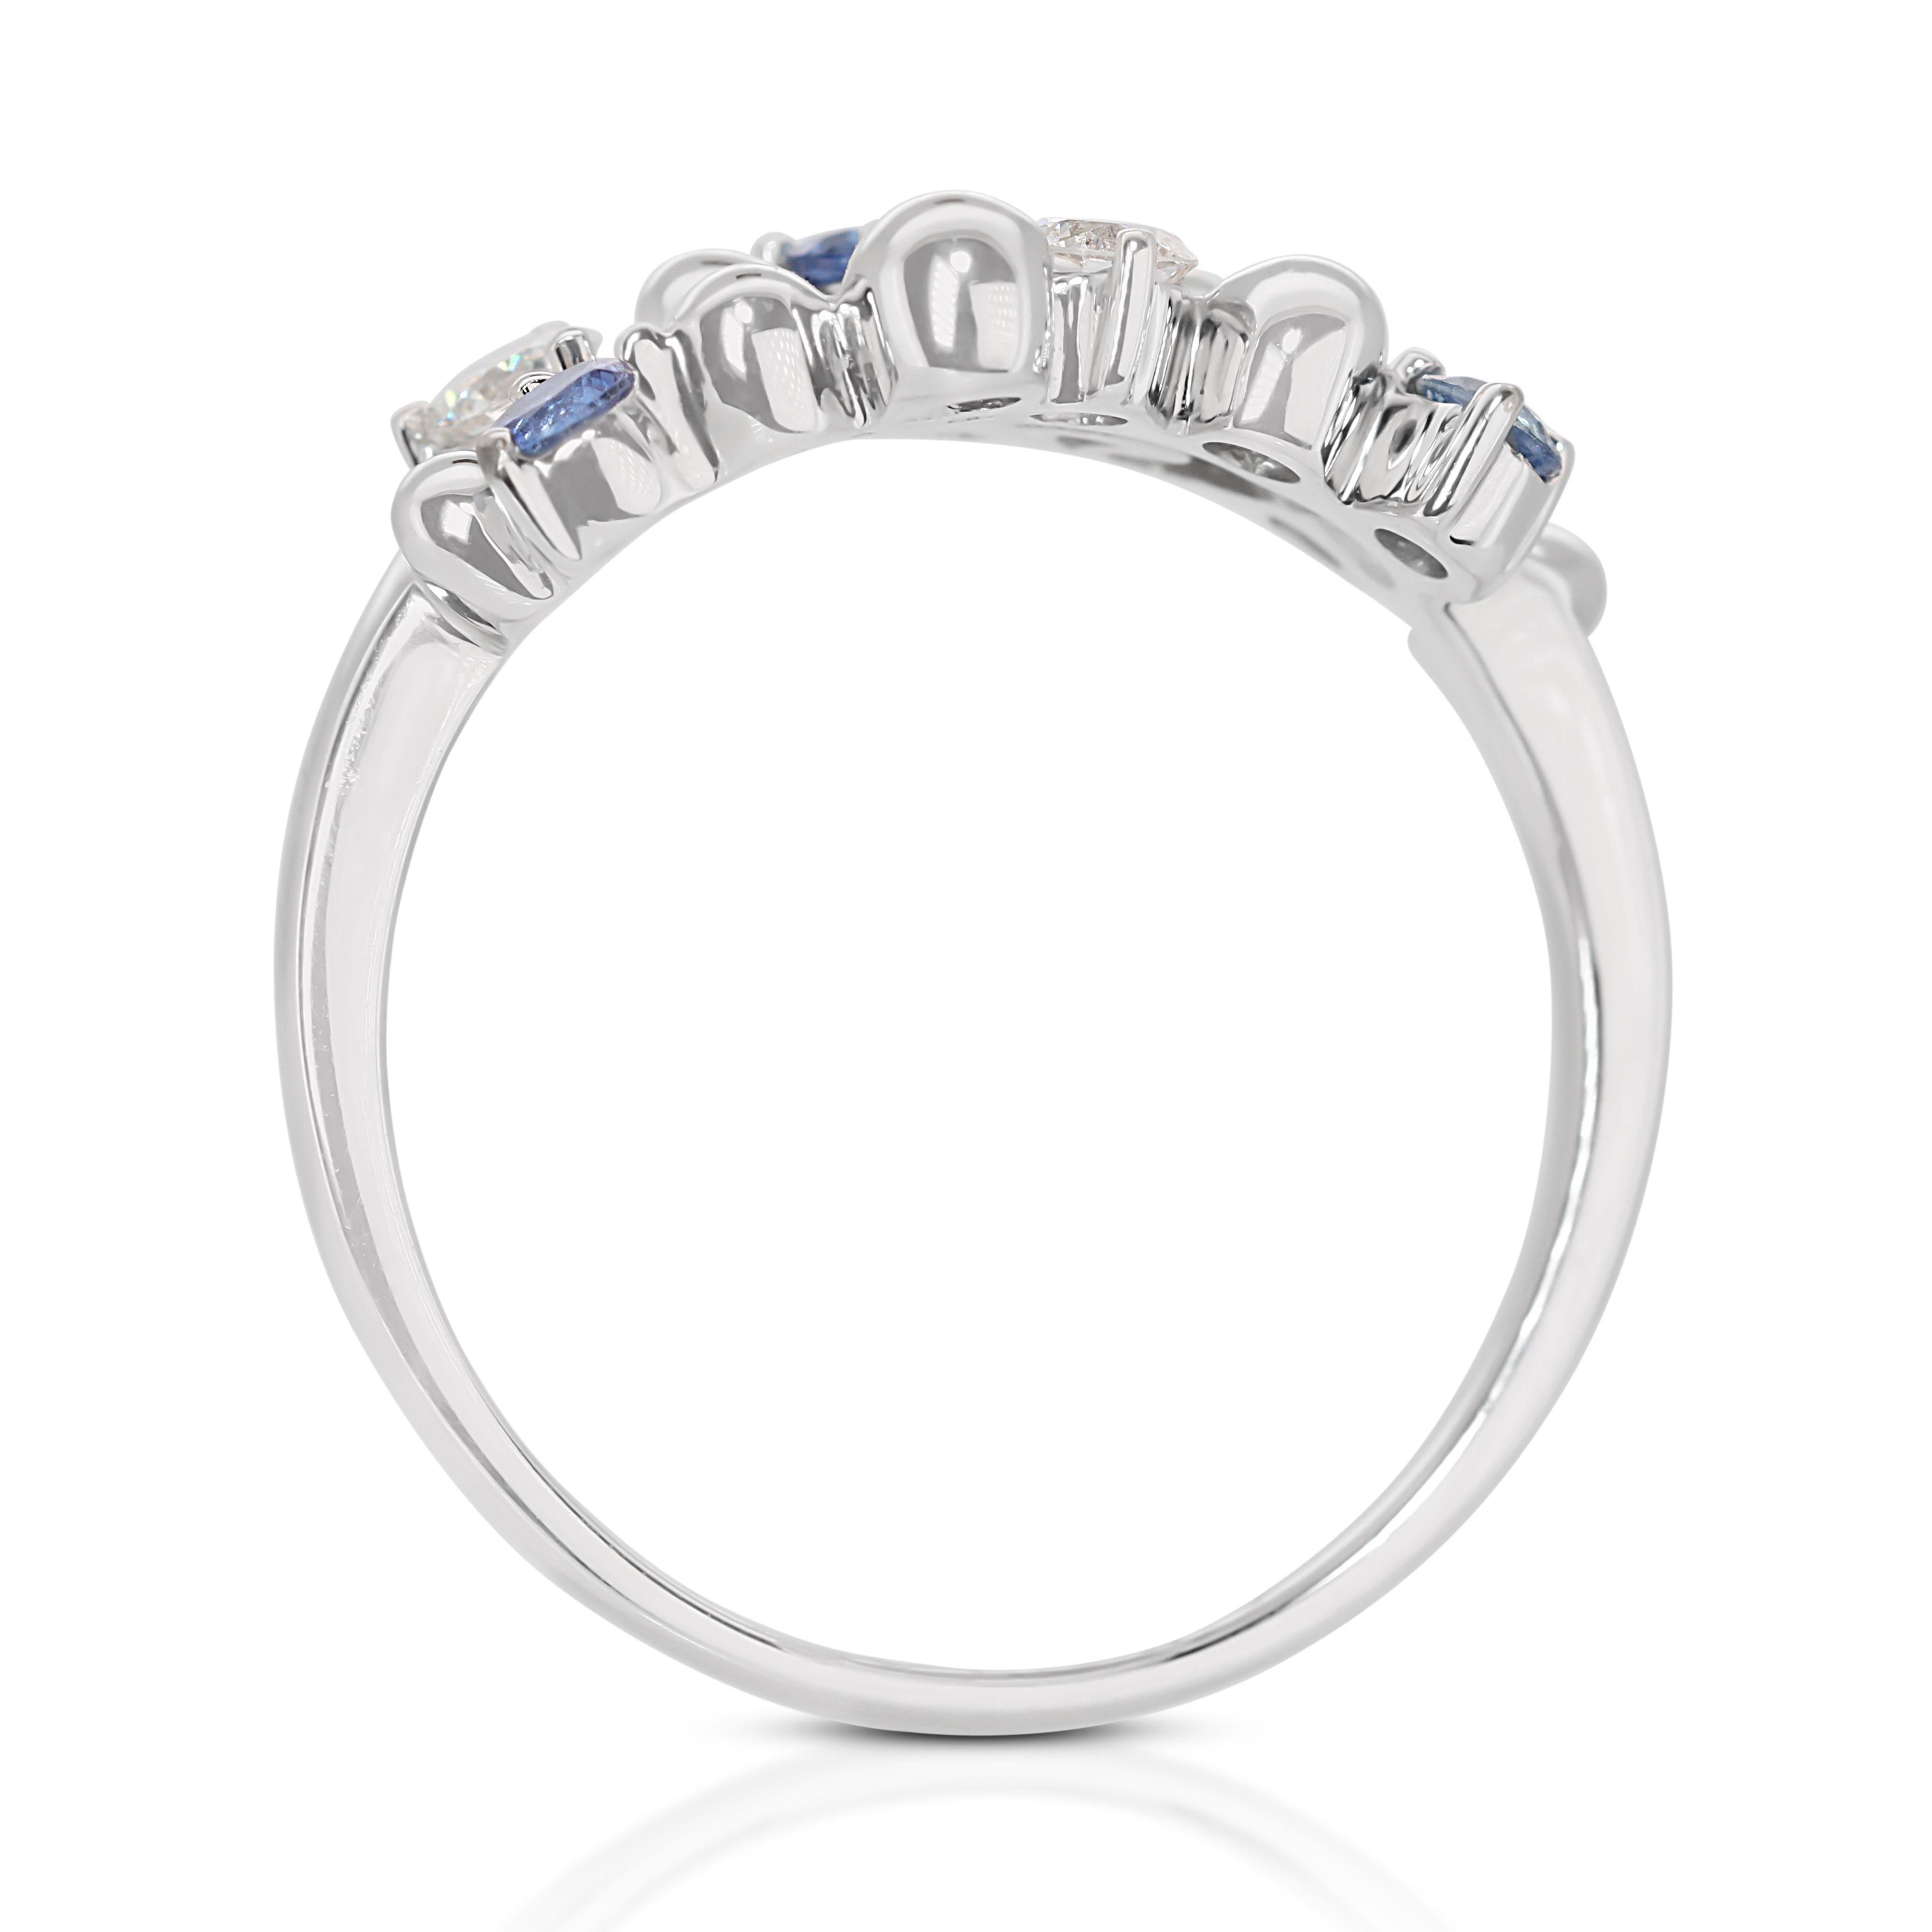 Women's Stunning 18k White Gold Ring with  0.24 Ct Sapphire and Diamonds NGI Cert. For Sale